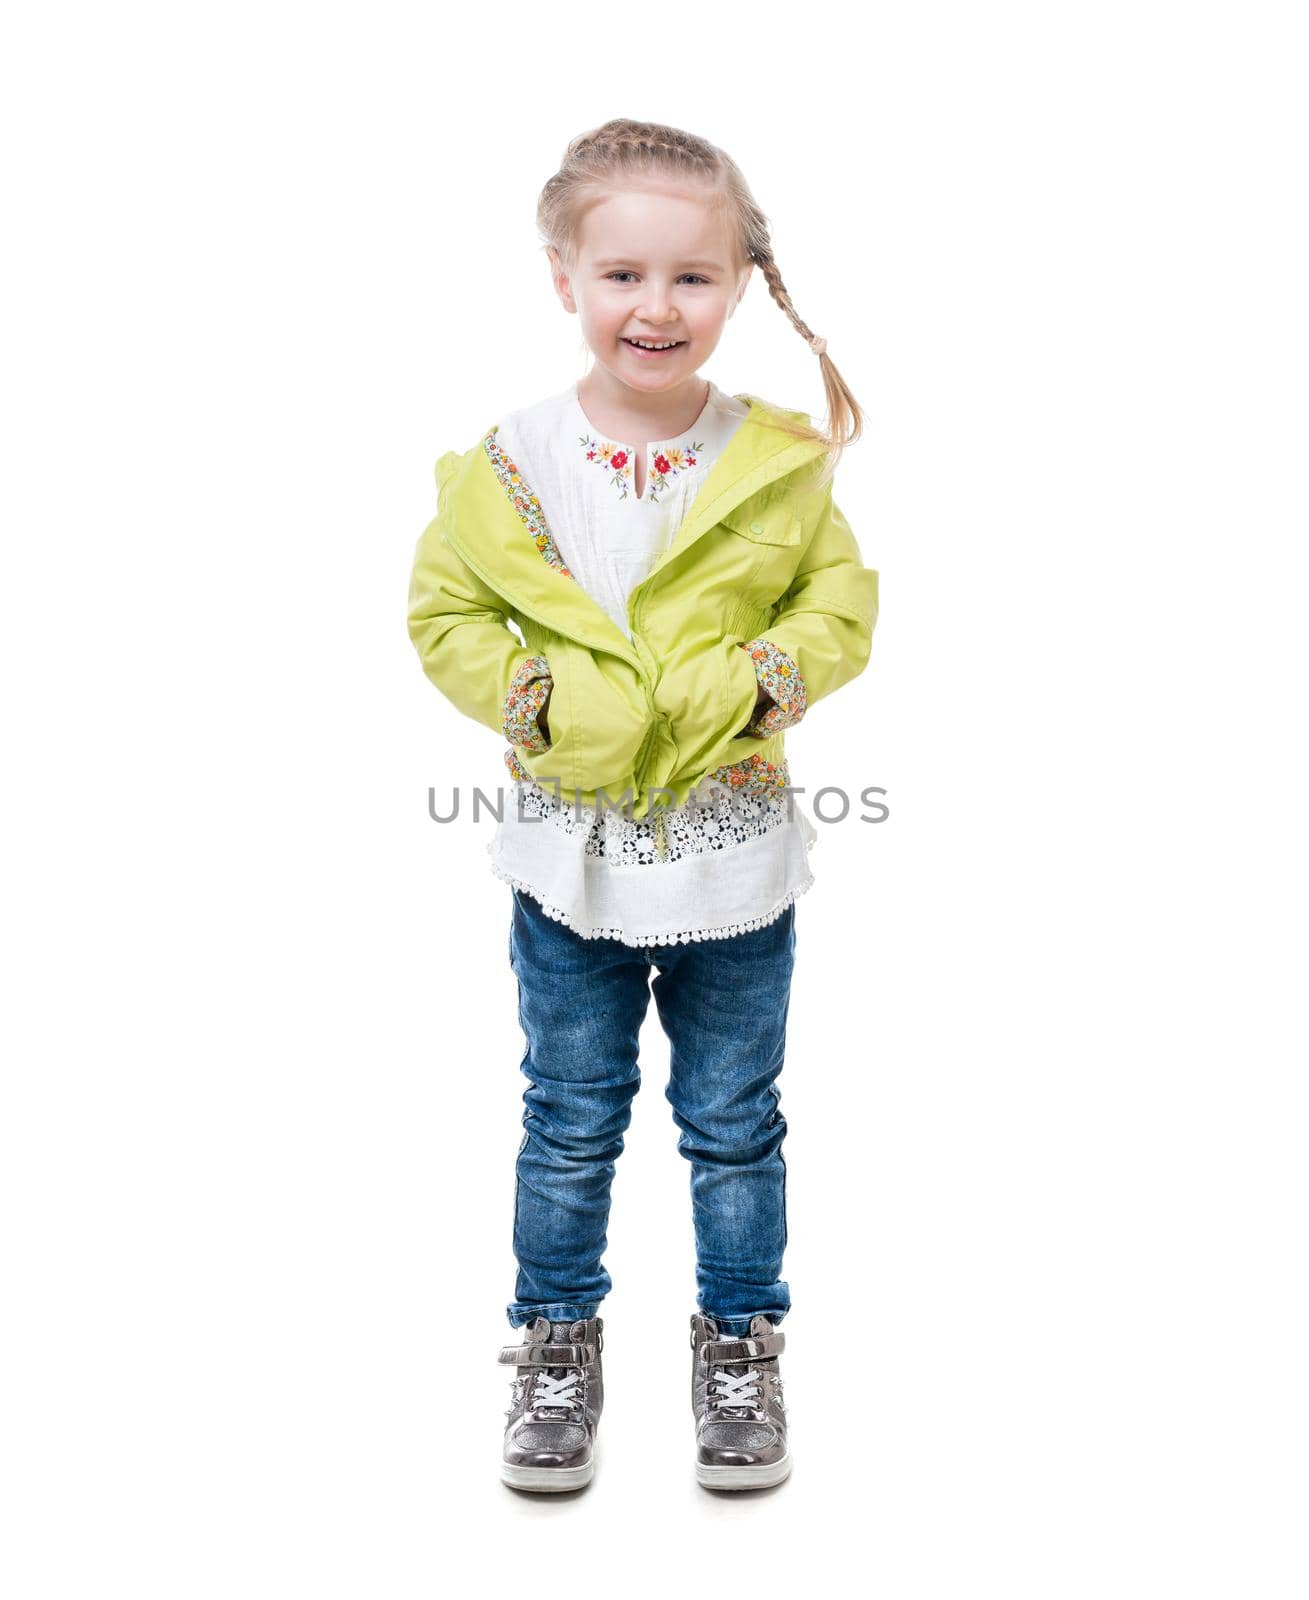 Little girl in a yellow jacket, silvery shirt standing, hugging herself, isolated on white background